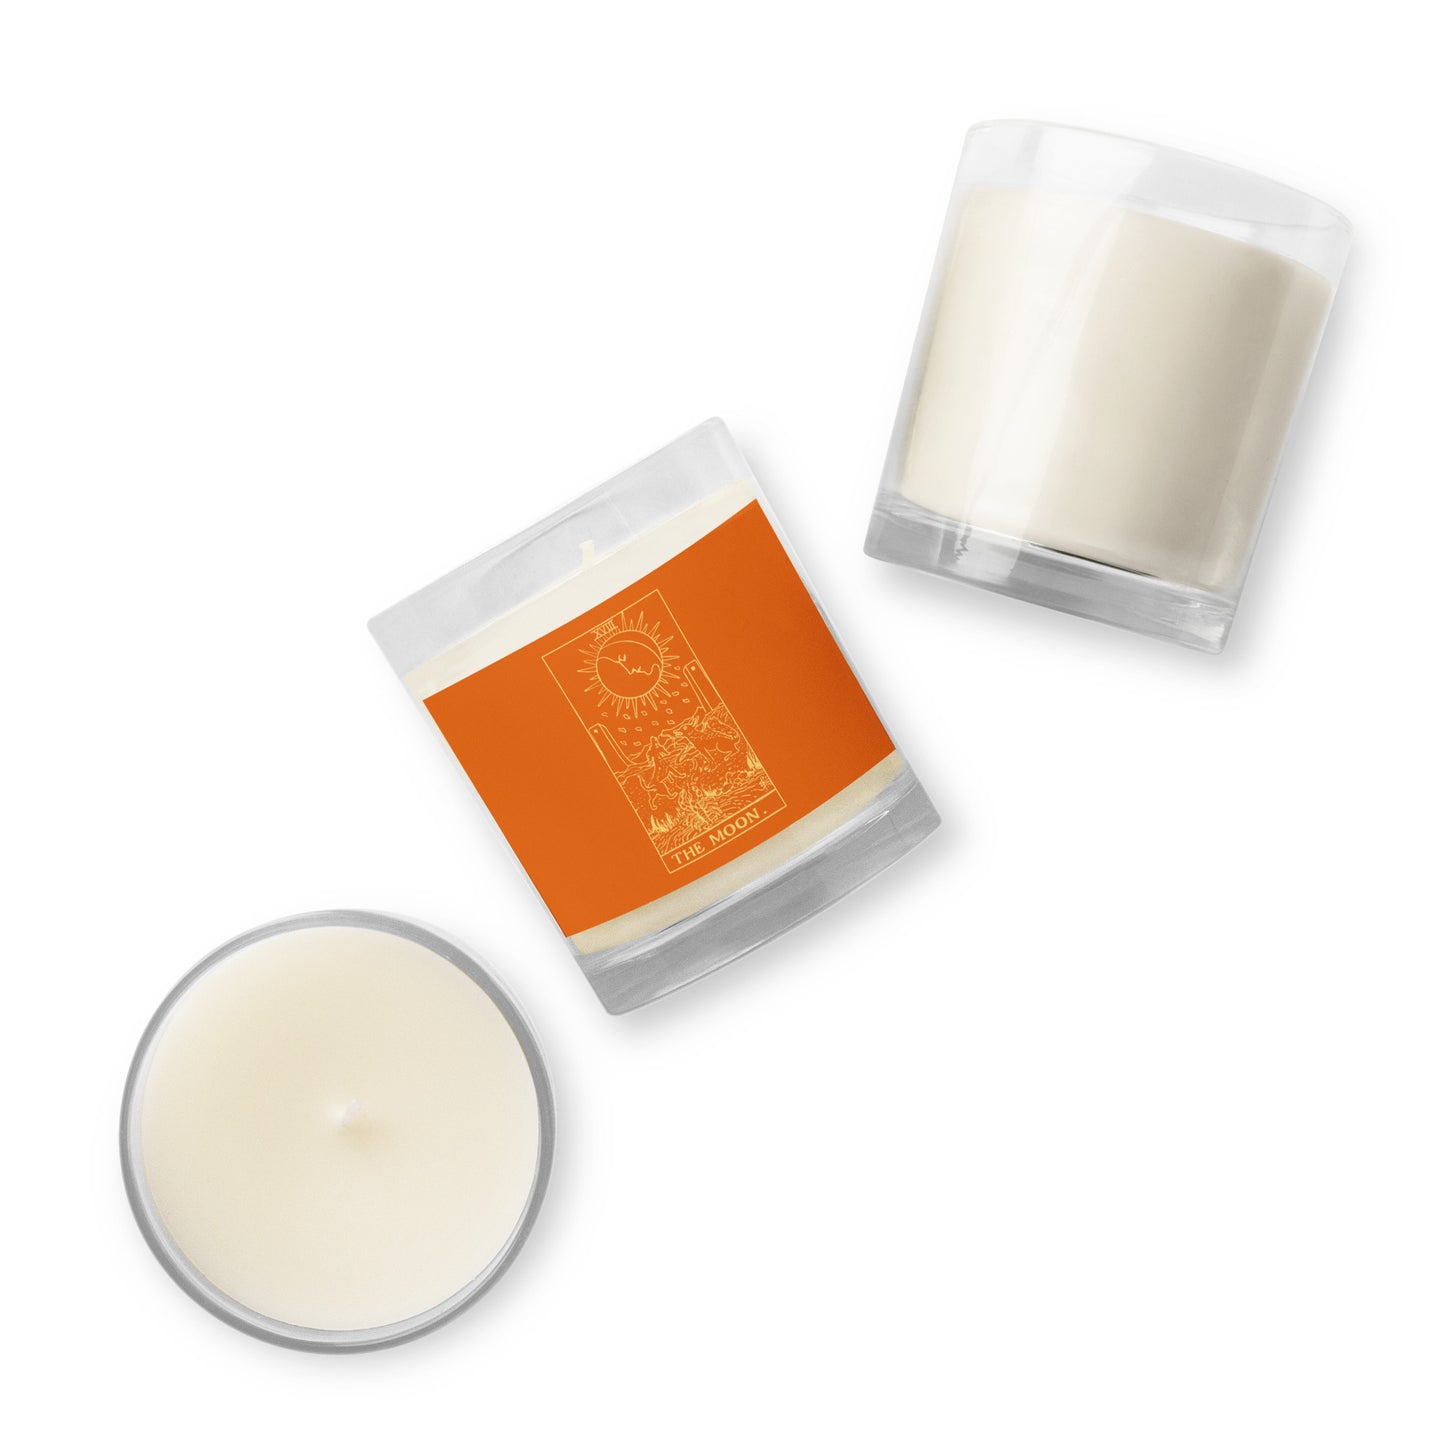 The Moon Card Unscented Candle